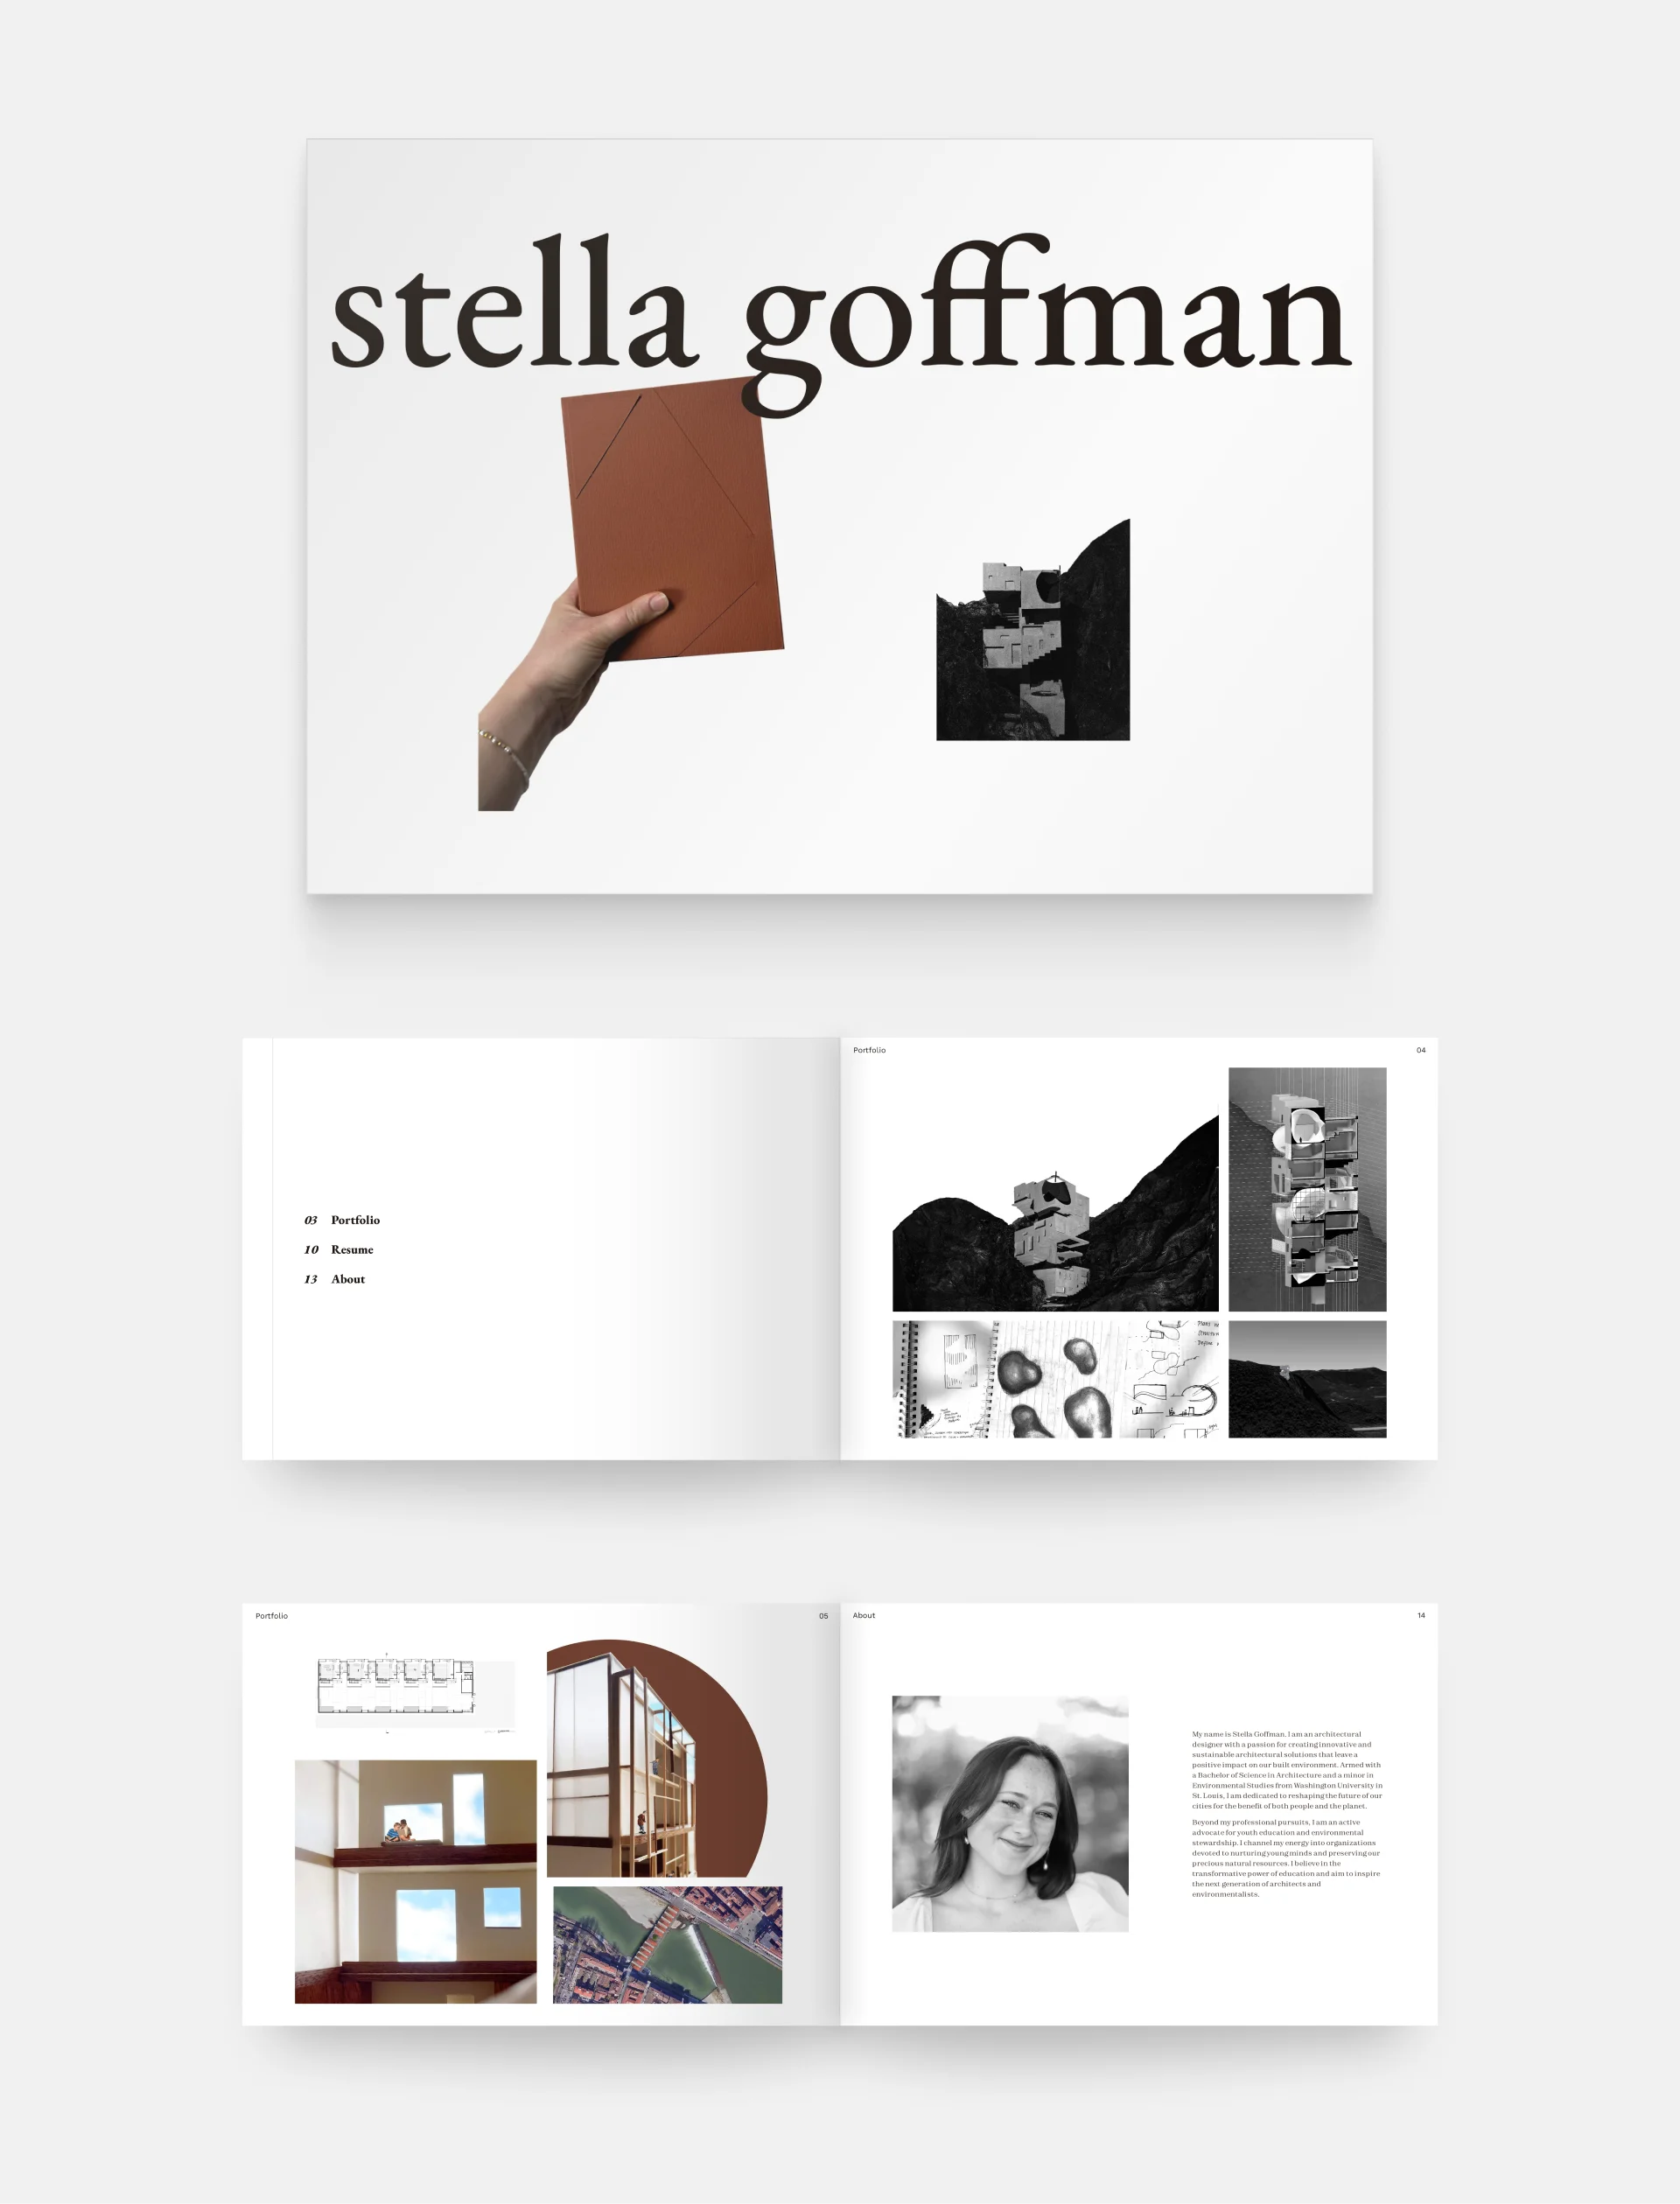 An image of a printed portfolio on a flat surface showcasing Stella Goffman's work sample